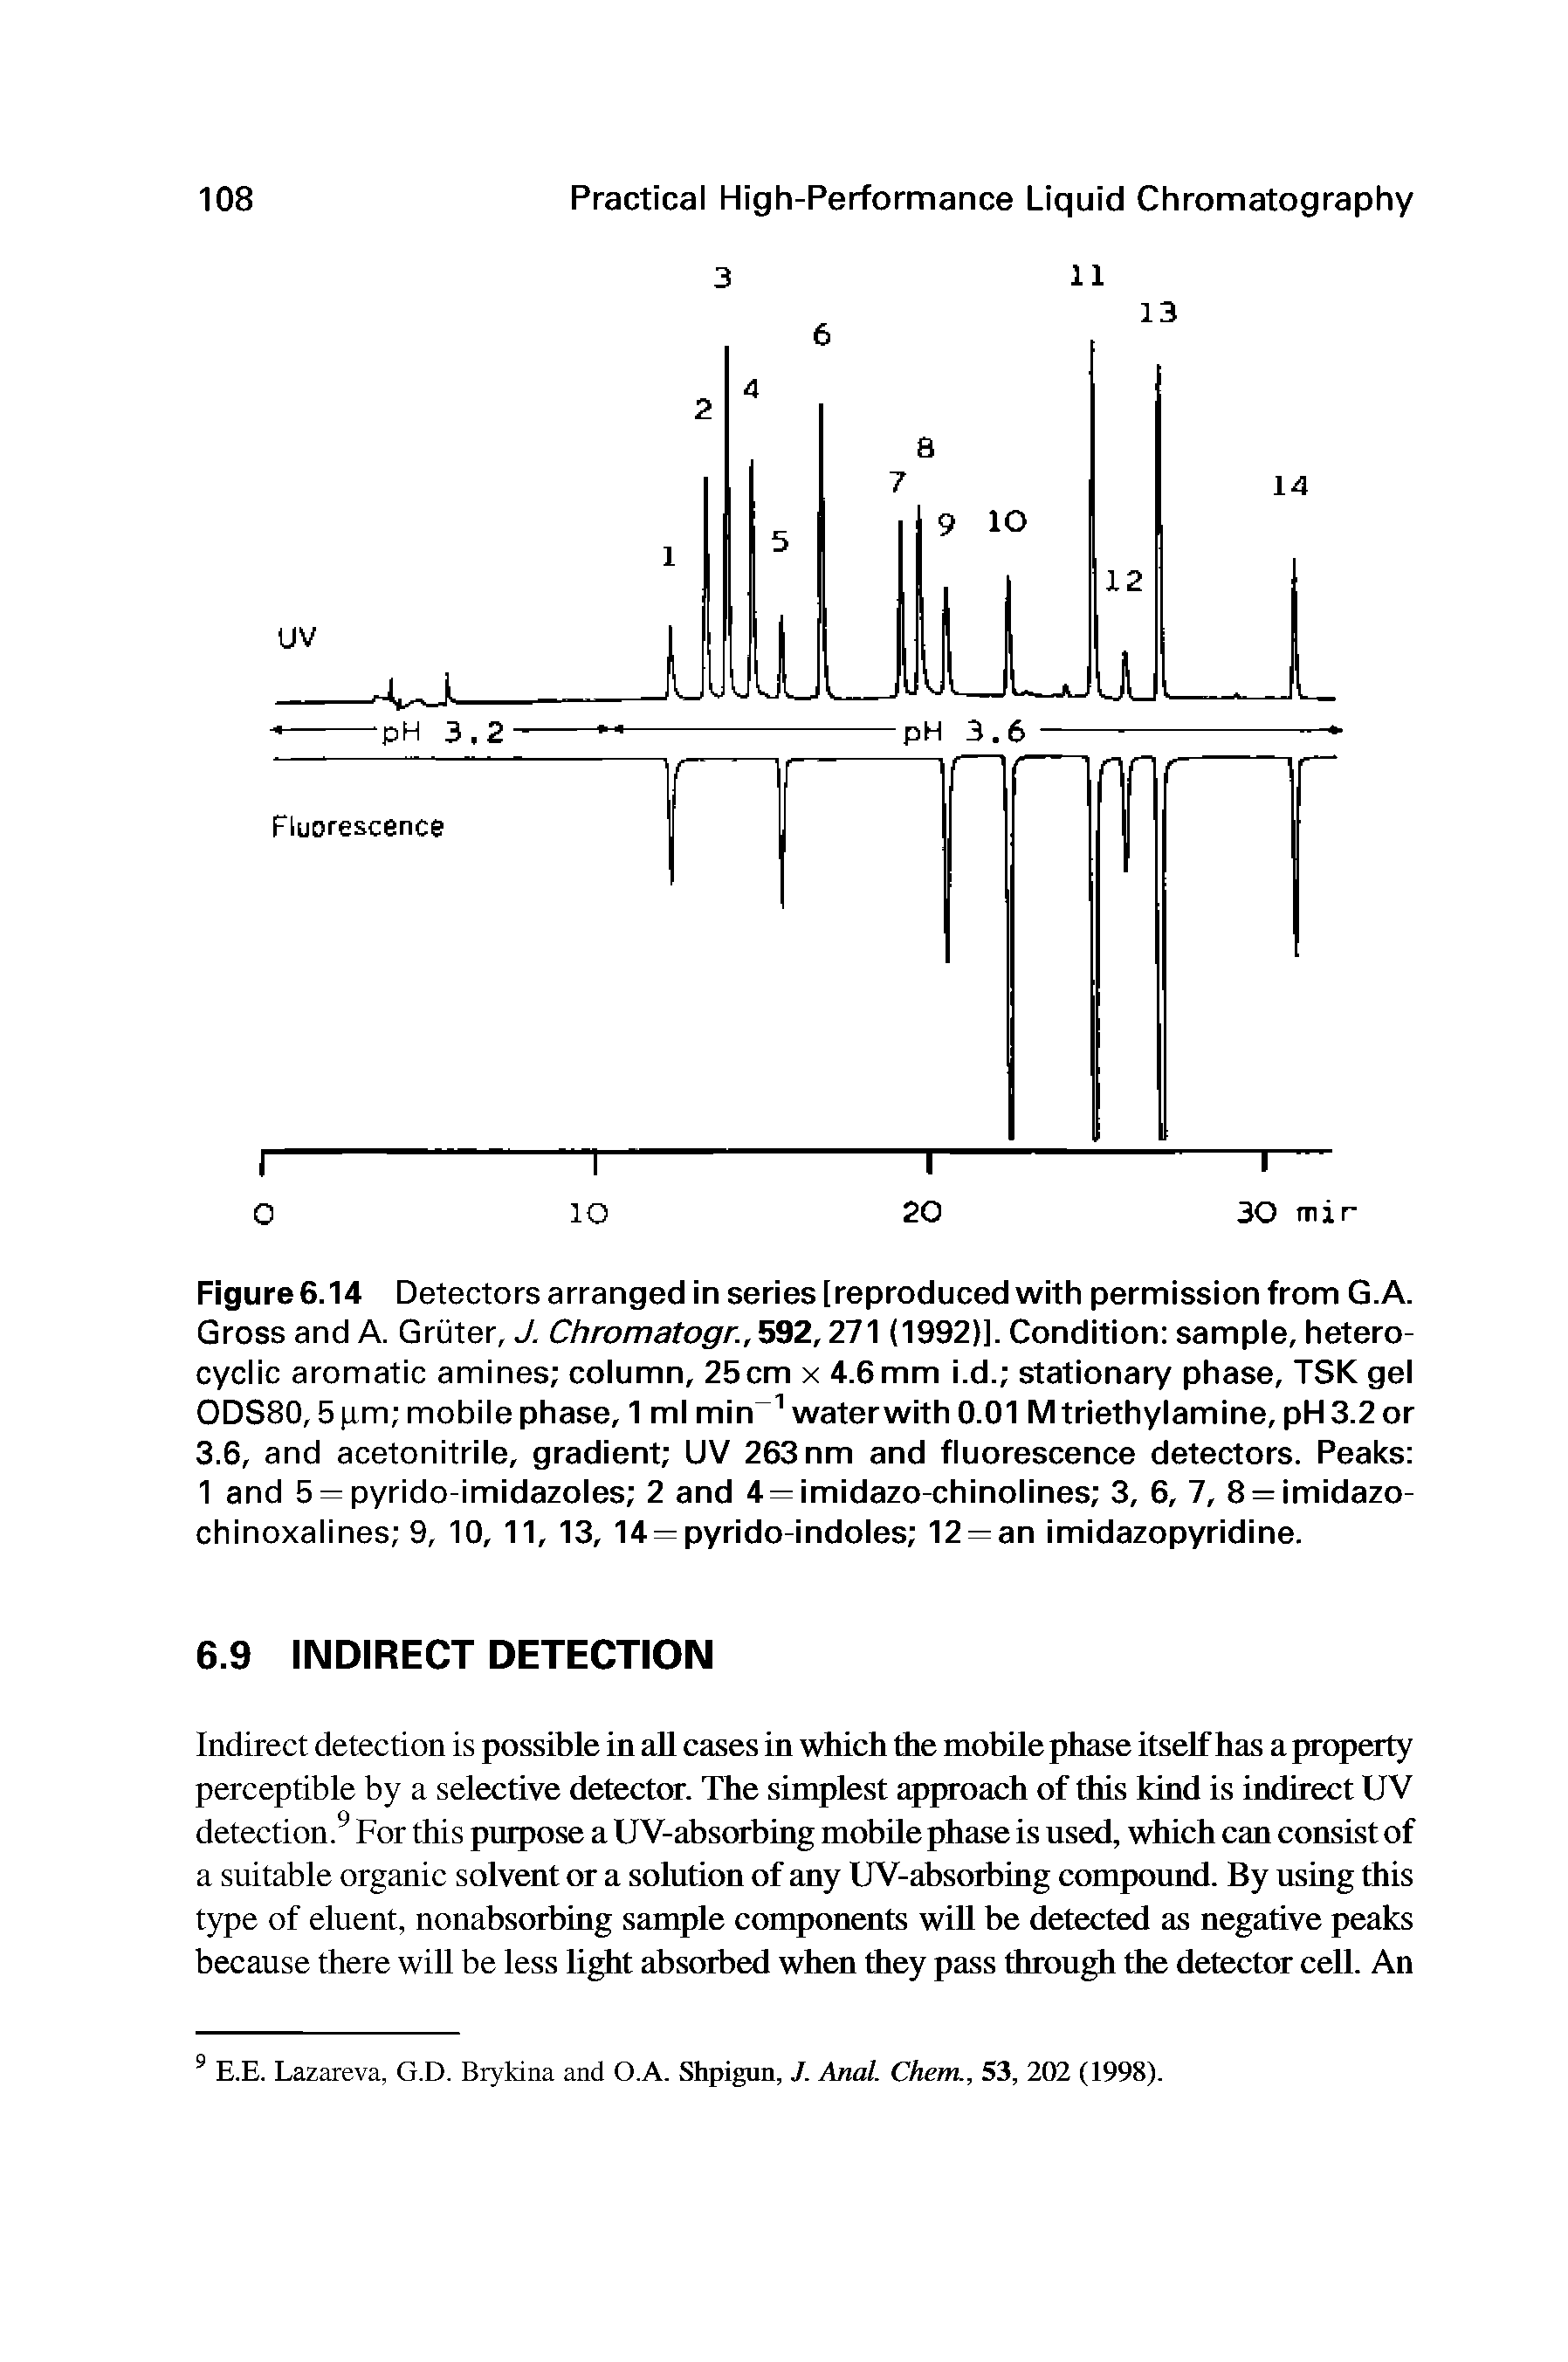 Figure 6.14 Detectors arranged in series [reproduced with permission from G.A. Gross and A. Gruter, J. Chromatogr, 592,271 (1992)]. Condition sample, heterocyclic aromatic amines column, 25cm x 4.6mm i.d. stationary phase, TSK gel ODS80,5 [xm mobile phase, 1 ml min waterwith 0.01 M triethylamine, pH 3.2 or 3.6, and acetonitrile, gradient UV 263 nm and fluorescence detectors. Peaks 1 and 5 = pyrido-imidazoles 2 and 4 —imidazo-chinolines 3, 6, 7, 8 = imidazo-chinoxalines 9, 10, 11, 13, 14 —pyrido-indoles 12 an imidazopyridine.